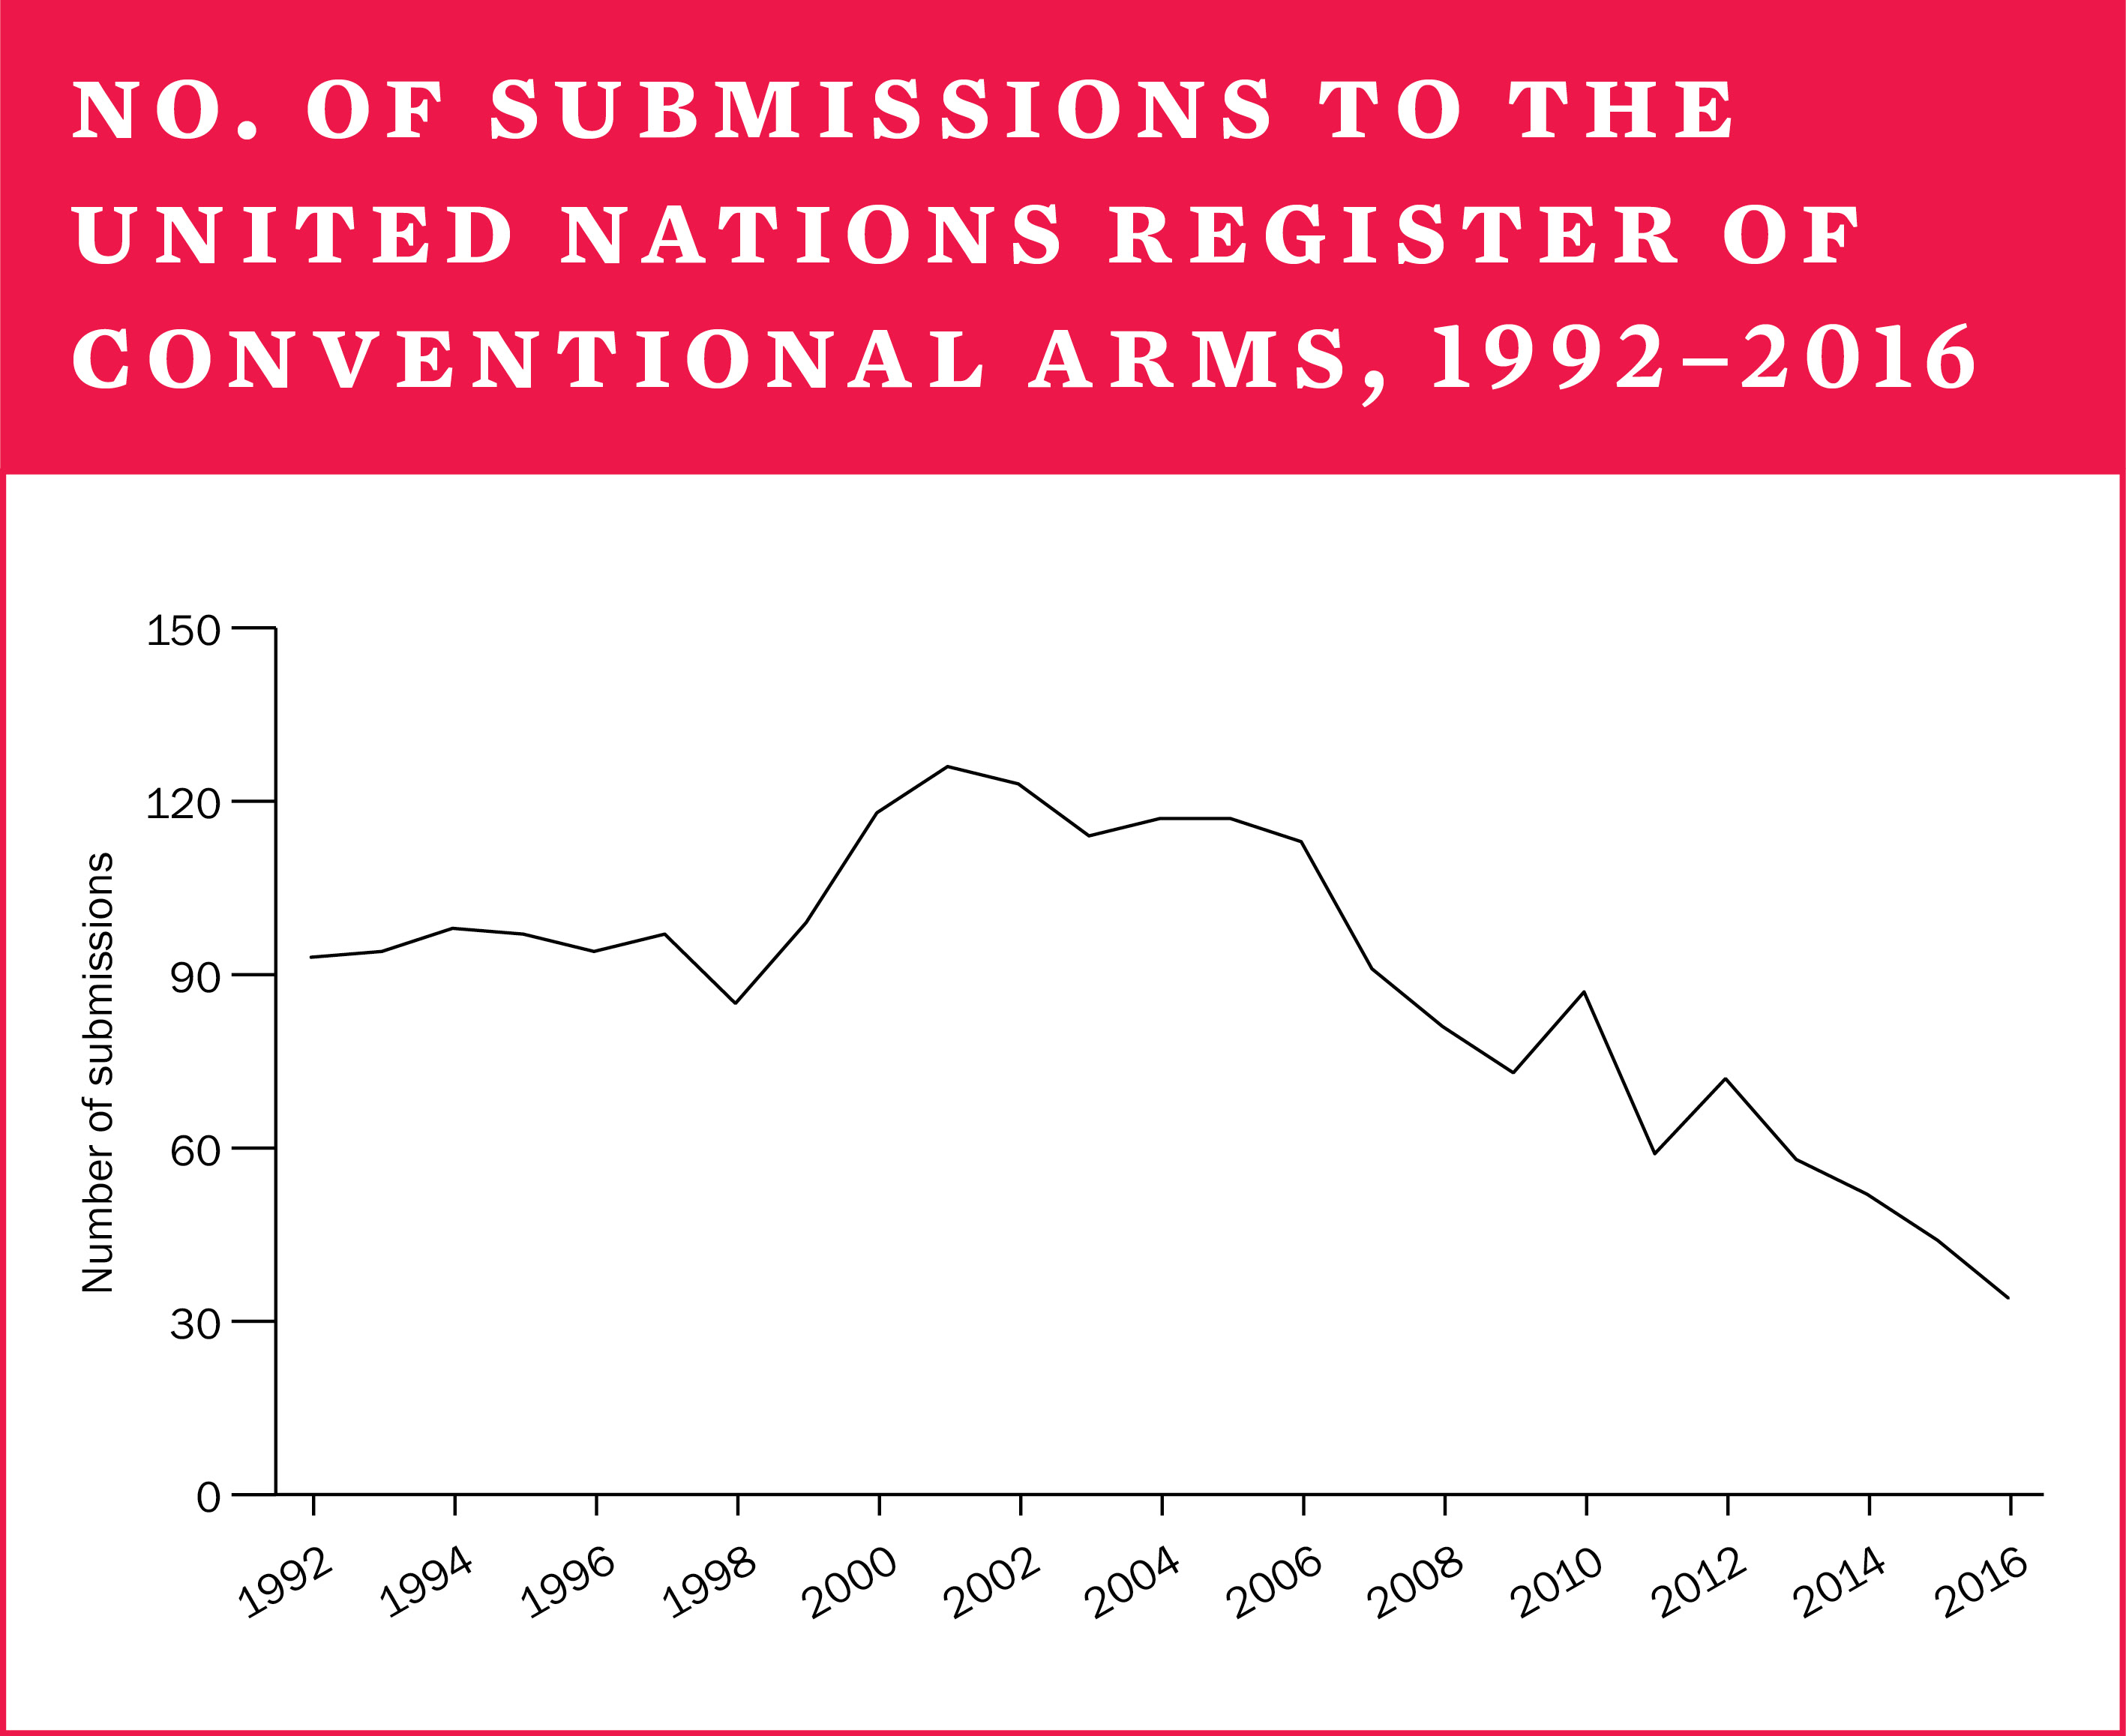 No. of submissions to the United Nations register of conventional arms, 1992-2016